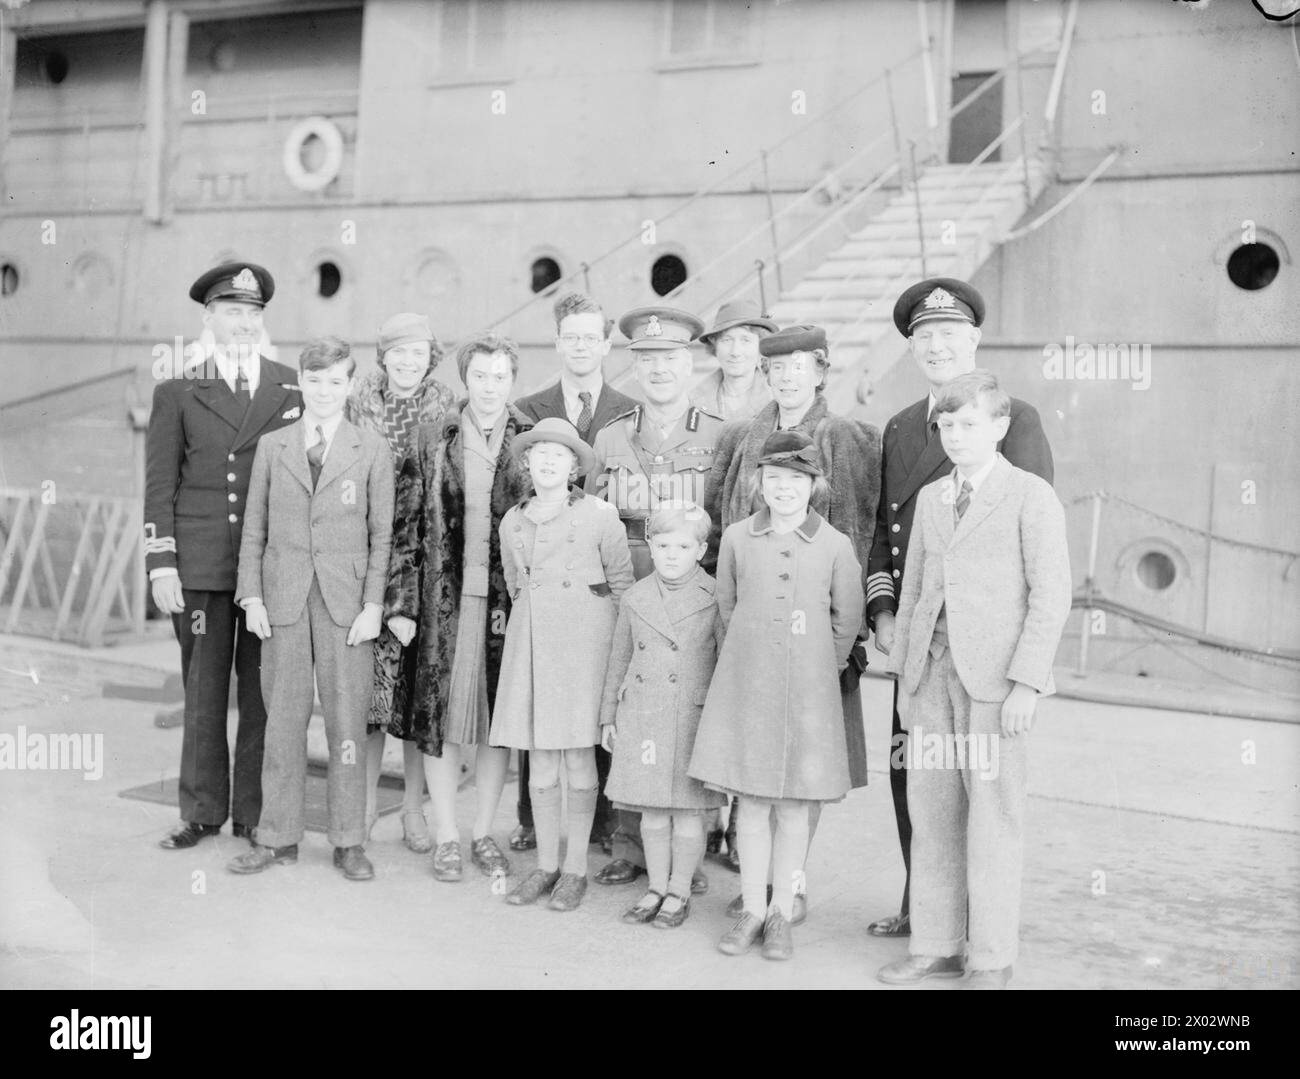 DISTINGUISHED COMPANY VISIT HMS COCHRANE AT ROSYTH. 25 DECEMBER 1941. - Left to right: Lieut Cdr Reid, RNVR, of HMS COCHRANE; Lord Jamie Bruce; Miss Don; Lady Jean Bruce; Lord Bruce, Earl of Elgin; Lady Cochrane (behind); The Countess of Elgin (in black hat and coat); Captain C H G Benson, DSO, RN. Front, Left to right: Miss Cochrane; Lord David Bruce, Lady Alison Bruce, and Master Cochrane Stock Photo